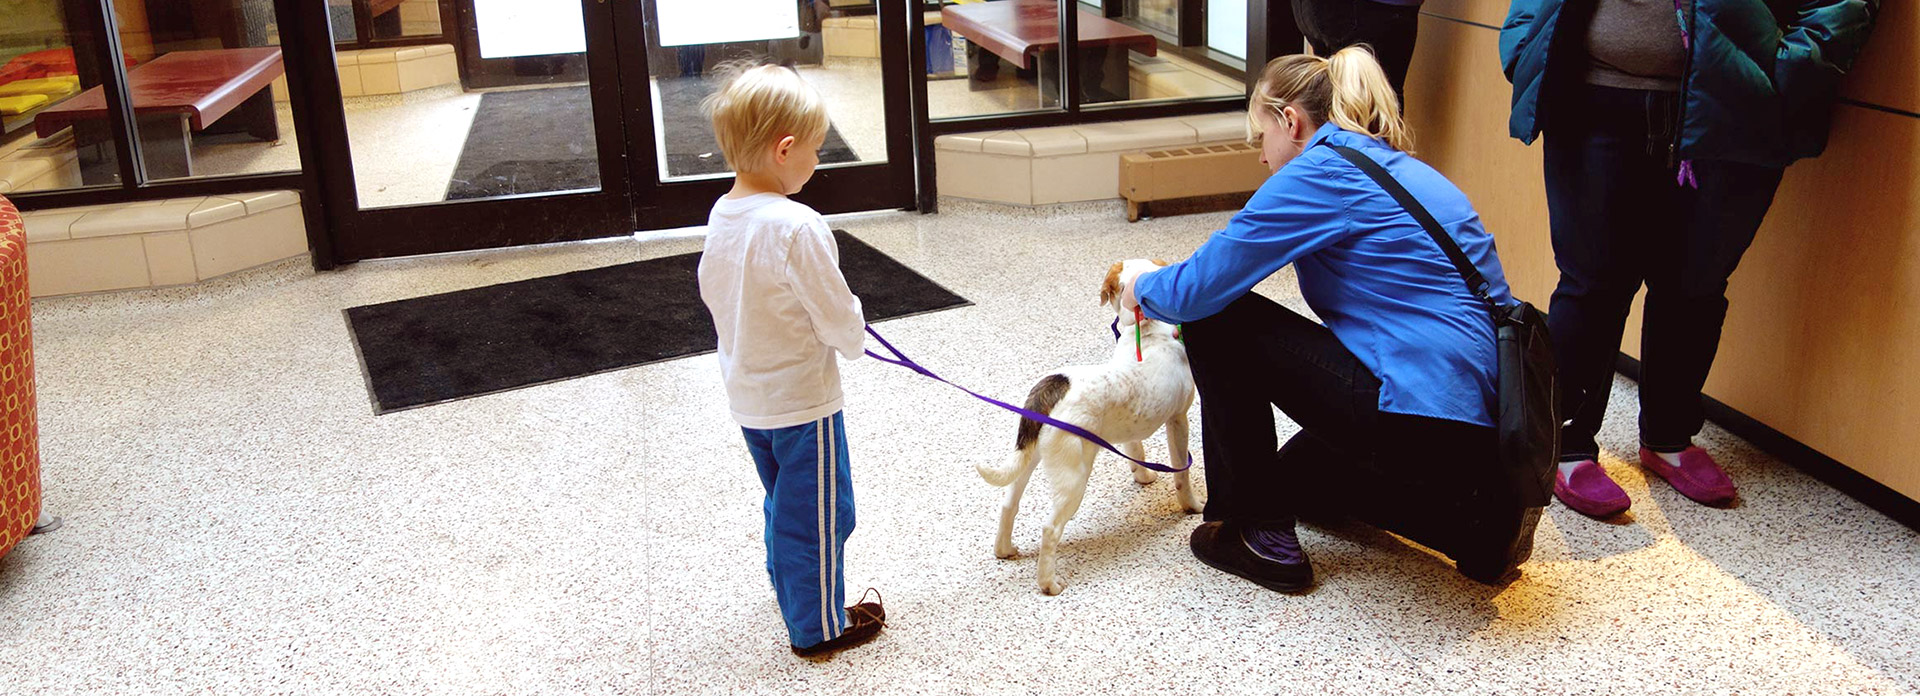 A little boy standing with a dog on a leash. His mother is kneeling down petting the dog.